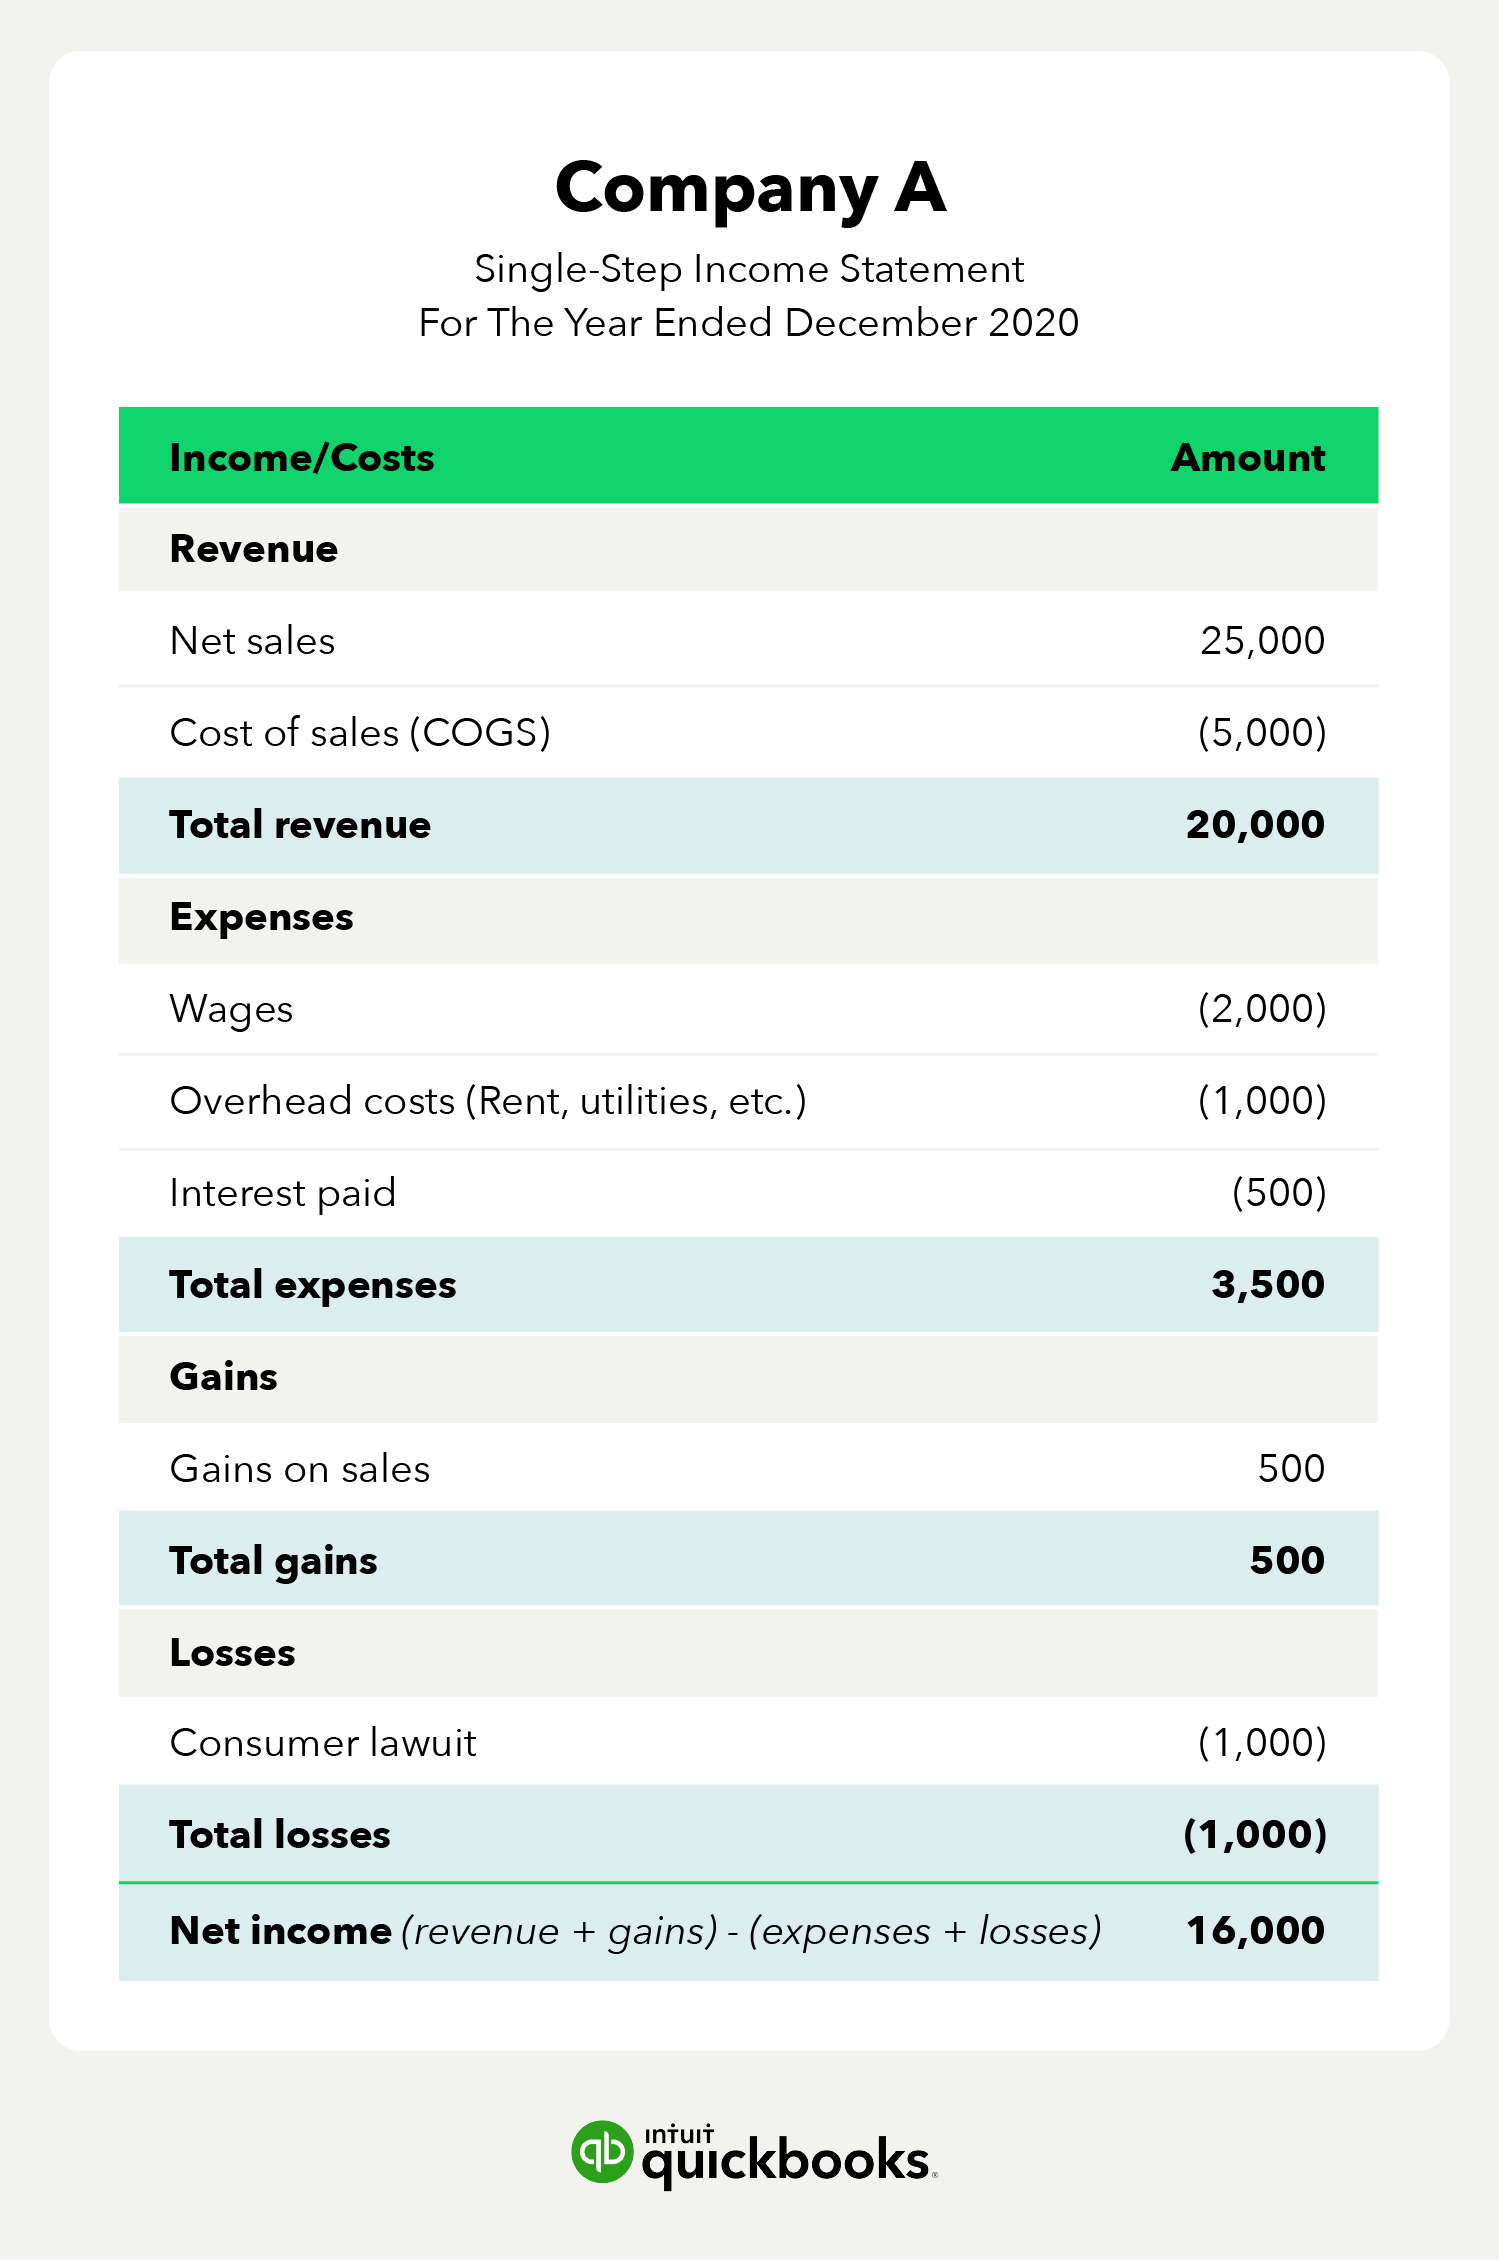 Example of a single-step income statement laid out in a chart